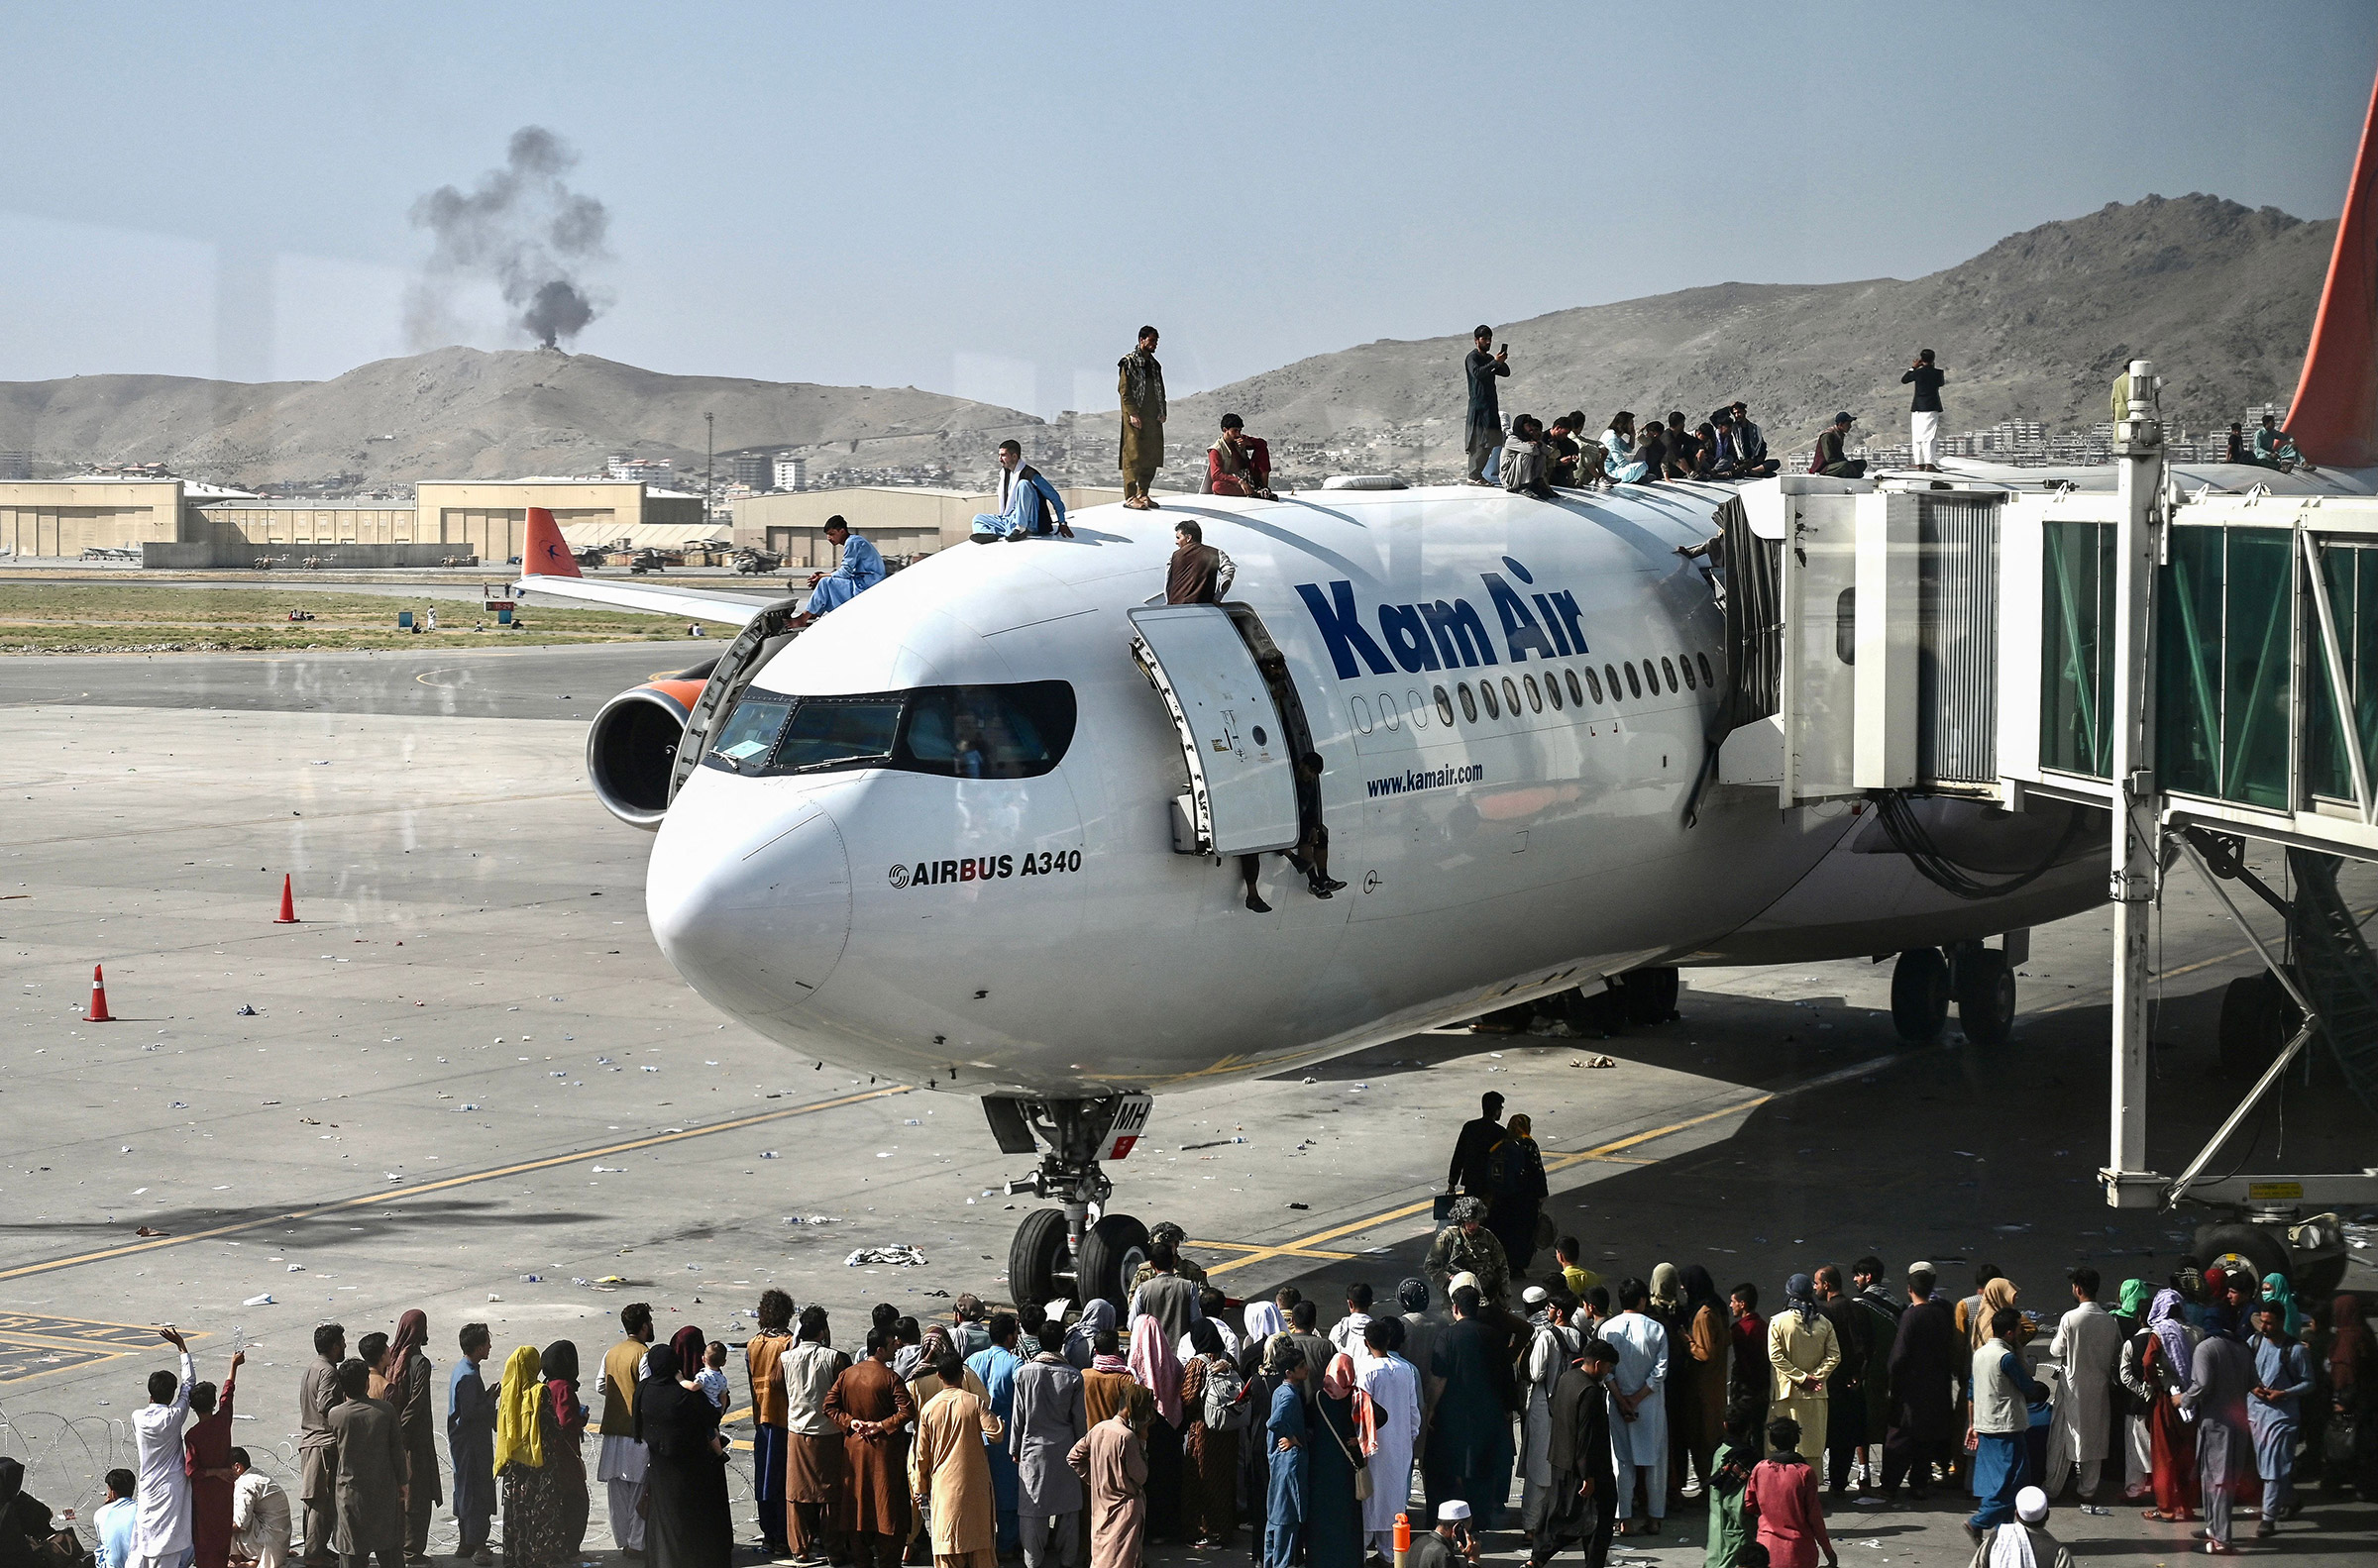 Afghan people climb atop a plane as they wait at the Kabul airport in Kabul on Aug. 16, 2021.